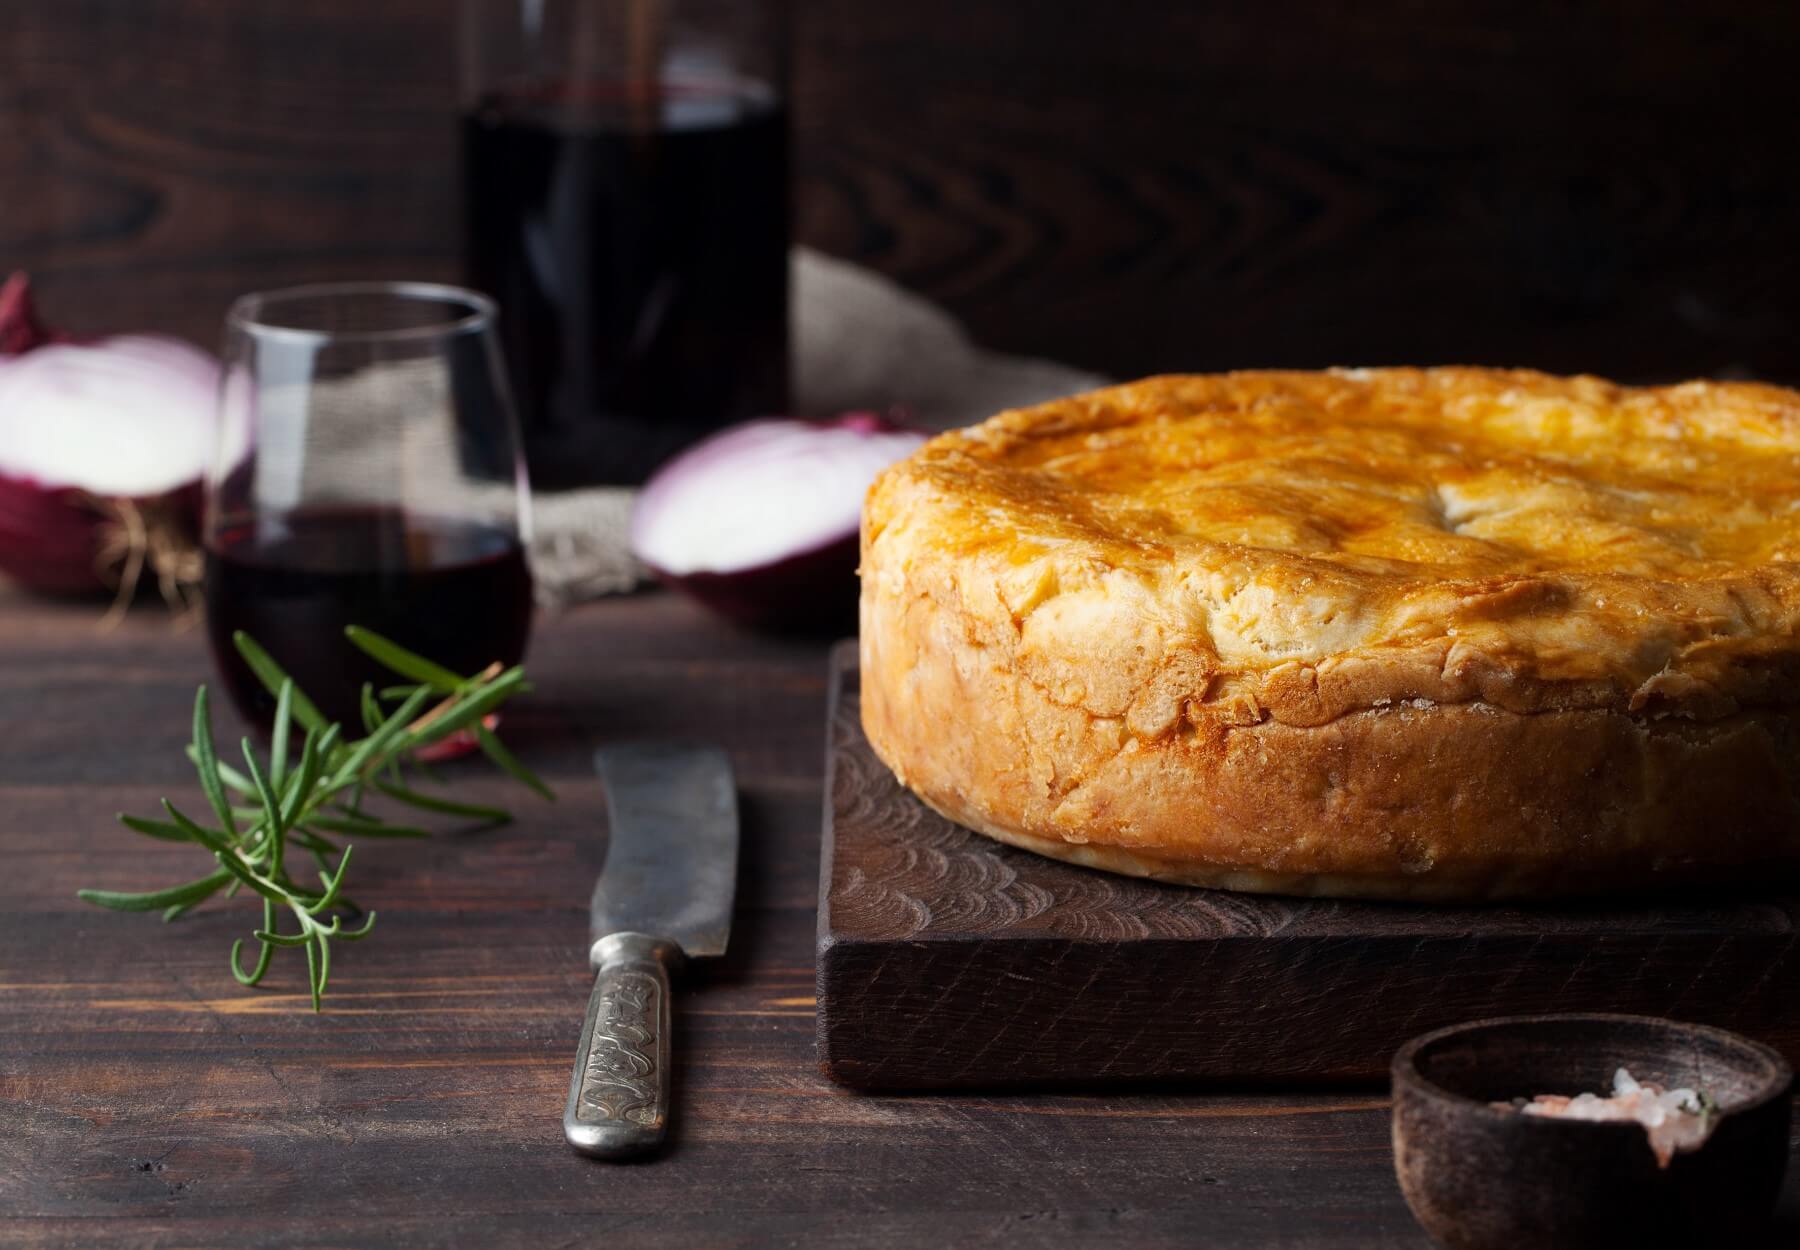 Steak and Ale Pie Recipe and Wine Pairing